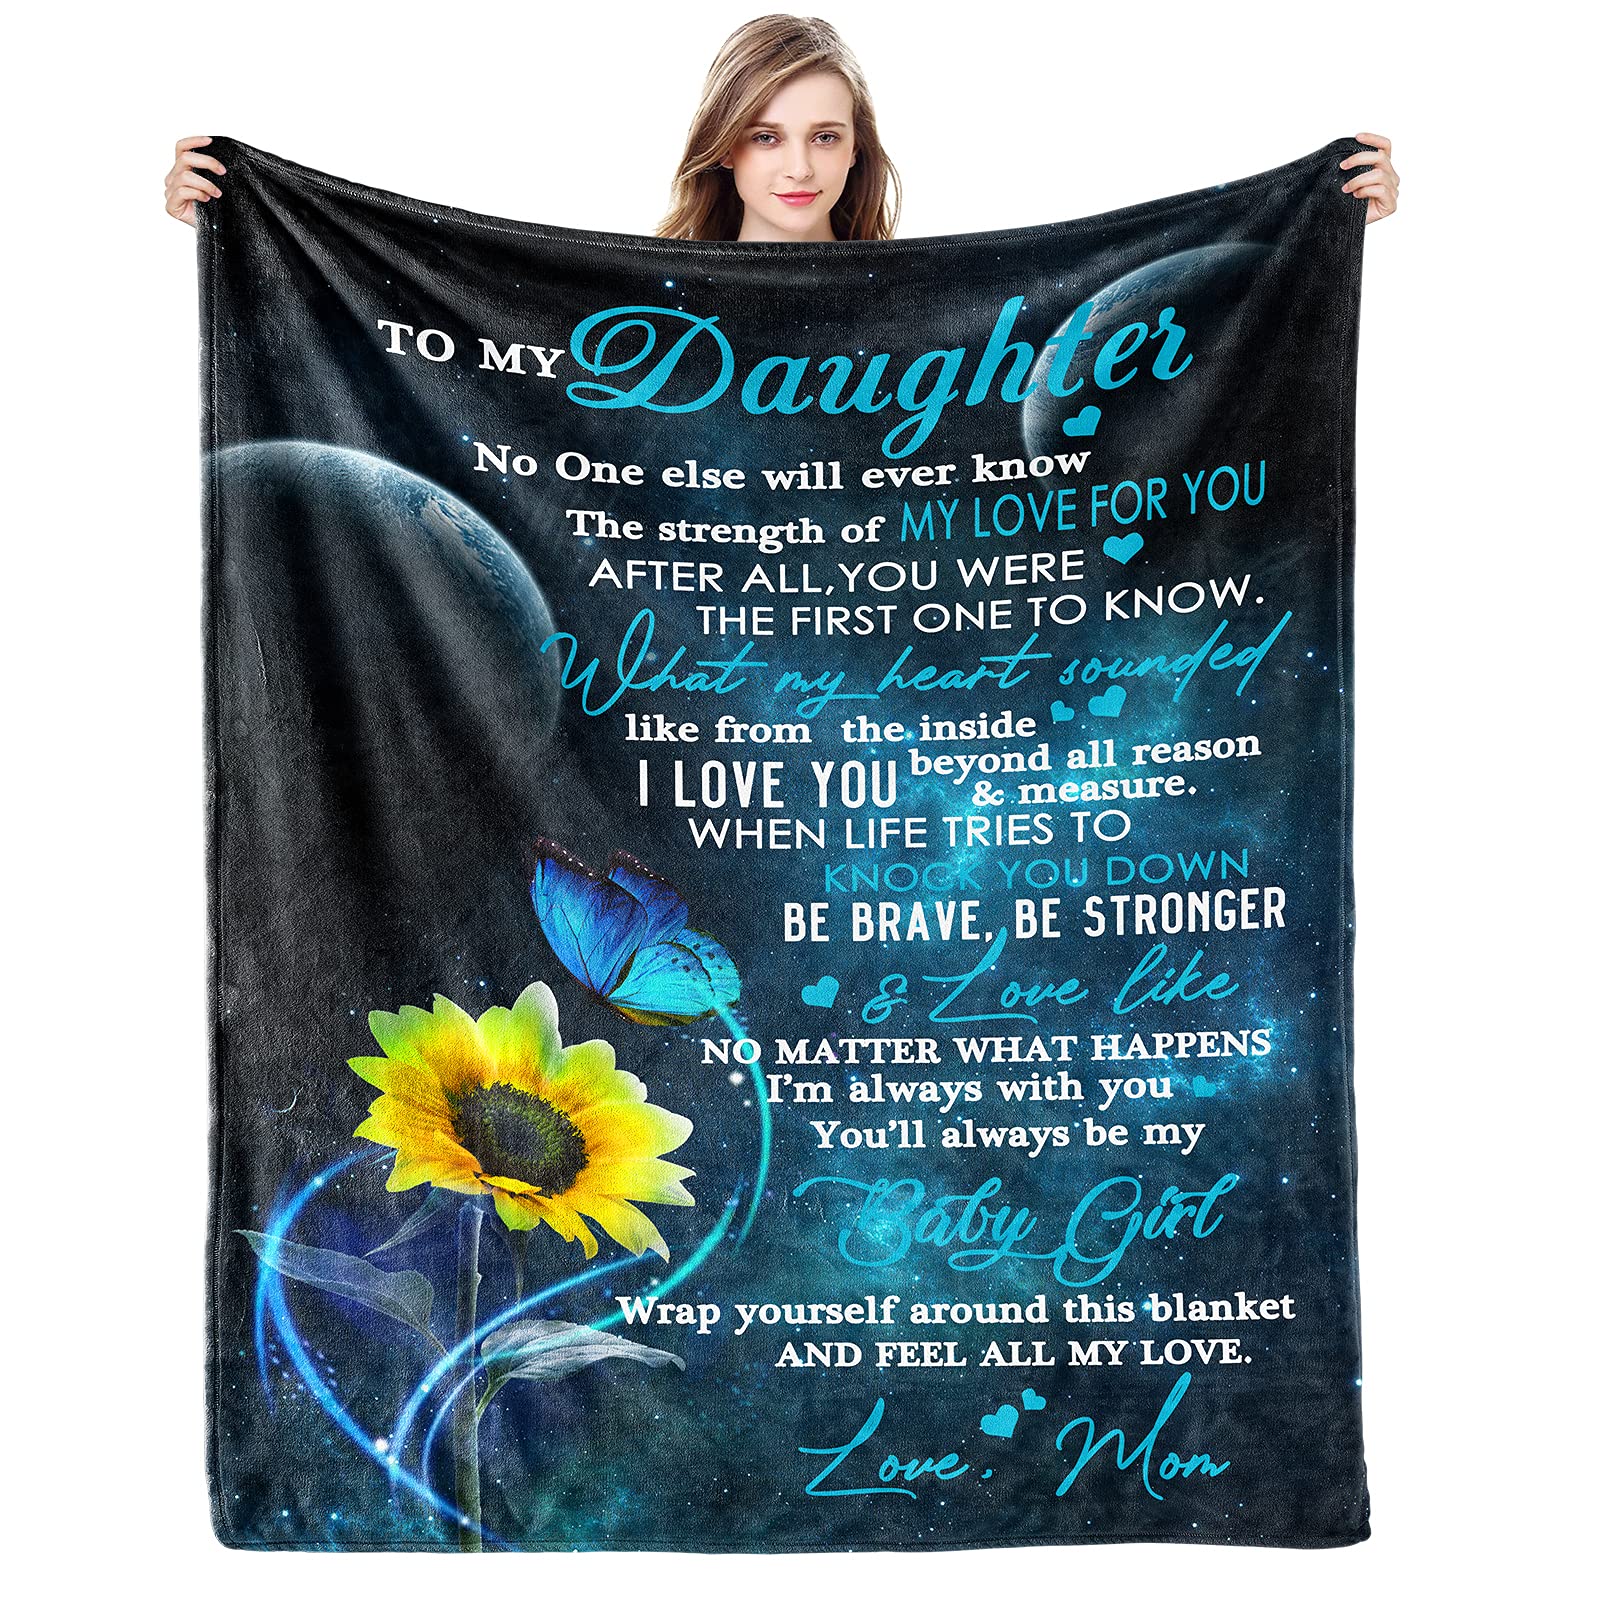 Givetoyou Daughter Gift from Mom Blanket Daughter Gifts to My Daughter Blanket Gifts for Daughter from Mom Birthday Gifts for Daughter Adu